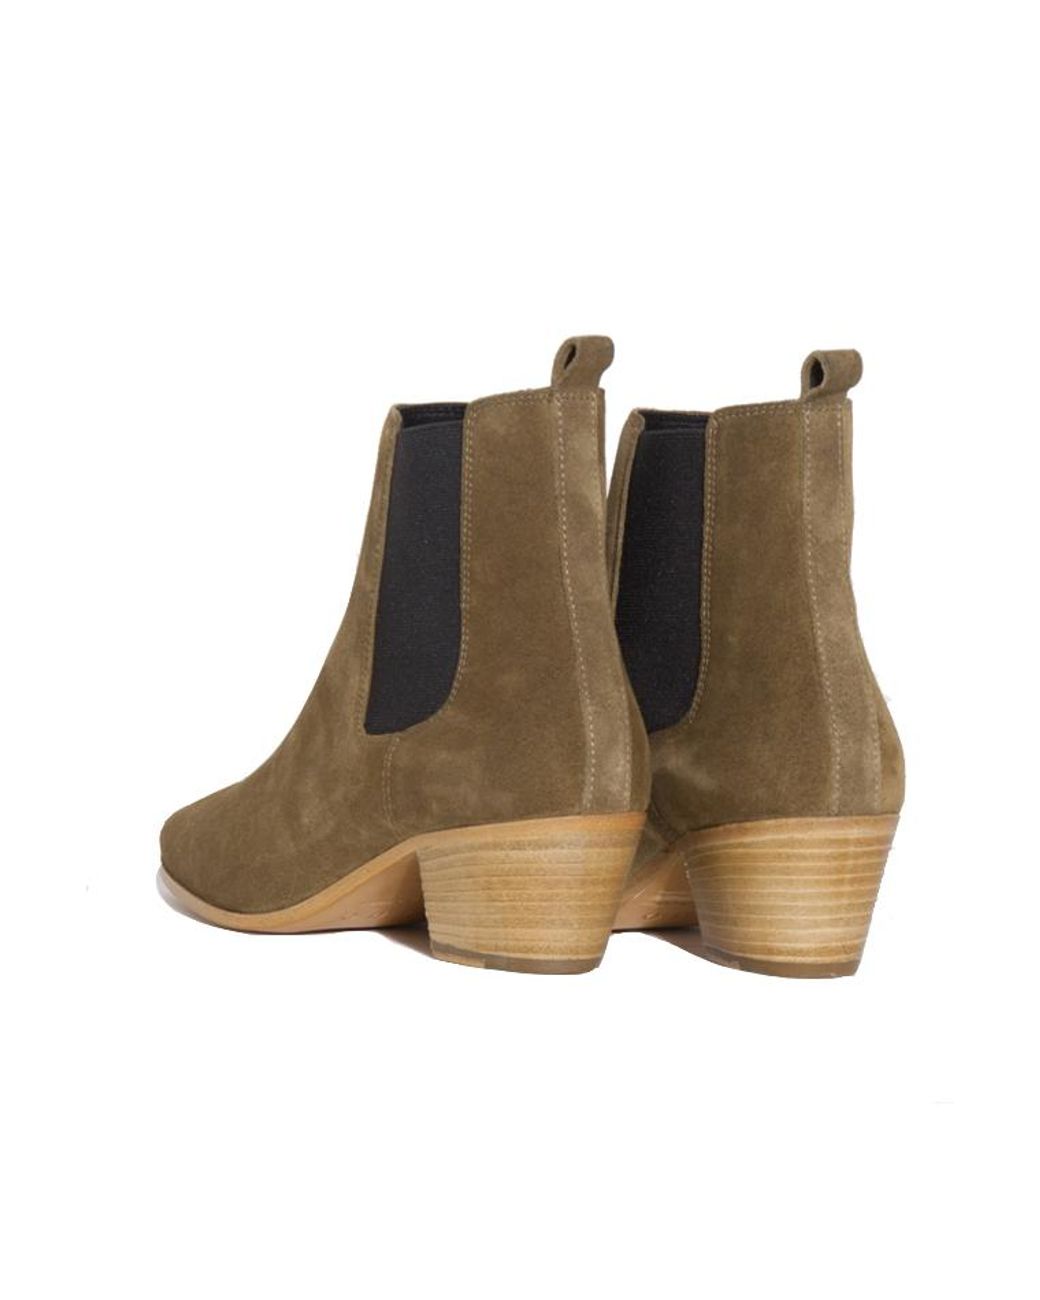 IRO Suede Yvette Boot Shoes in Khaki 